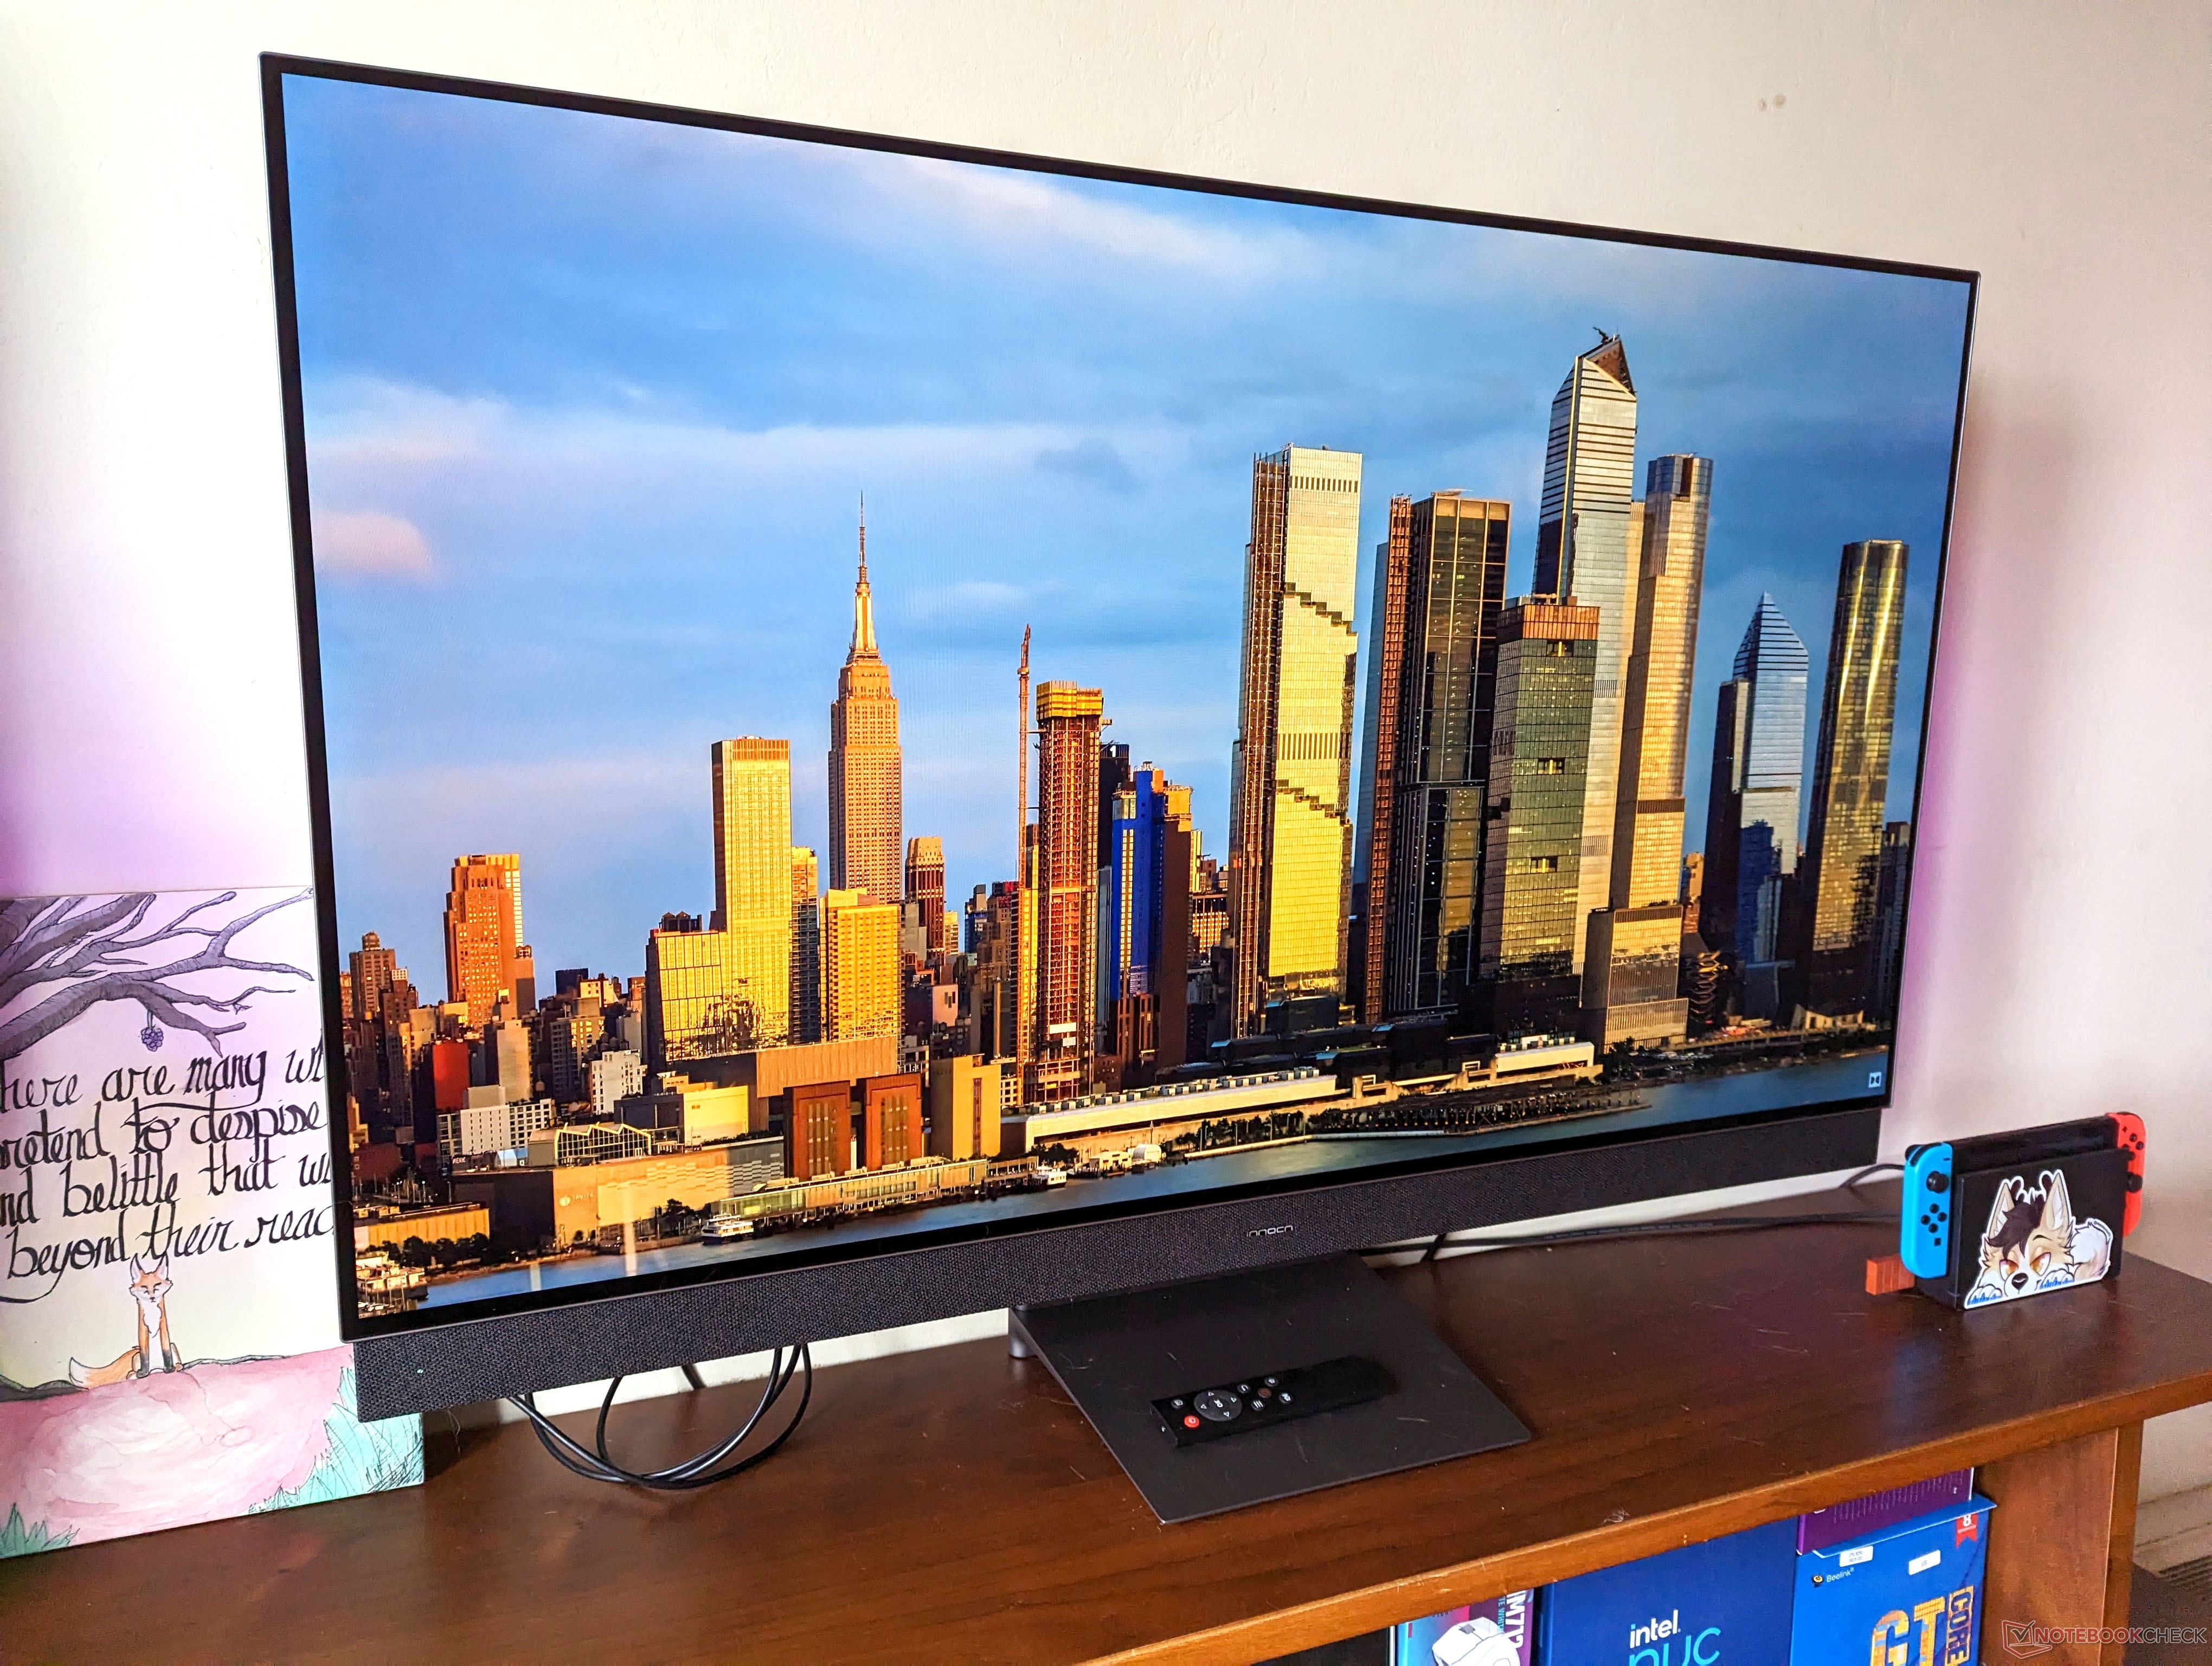 48-inch Innocn 48Q1V 4K gaming monitor on sale for US$1125, utilizes OLED  panel from LG for 98 percent DCI-P3 colors -  News